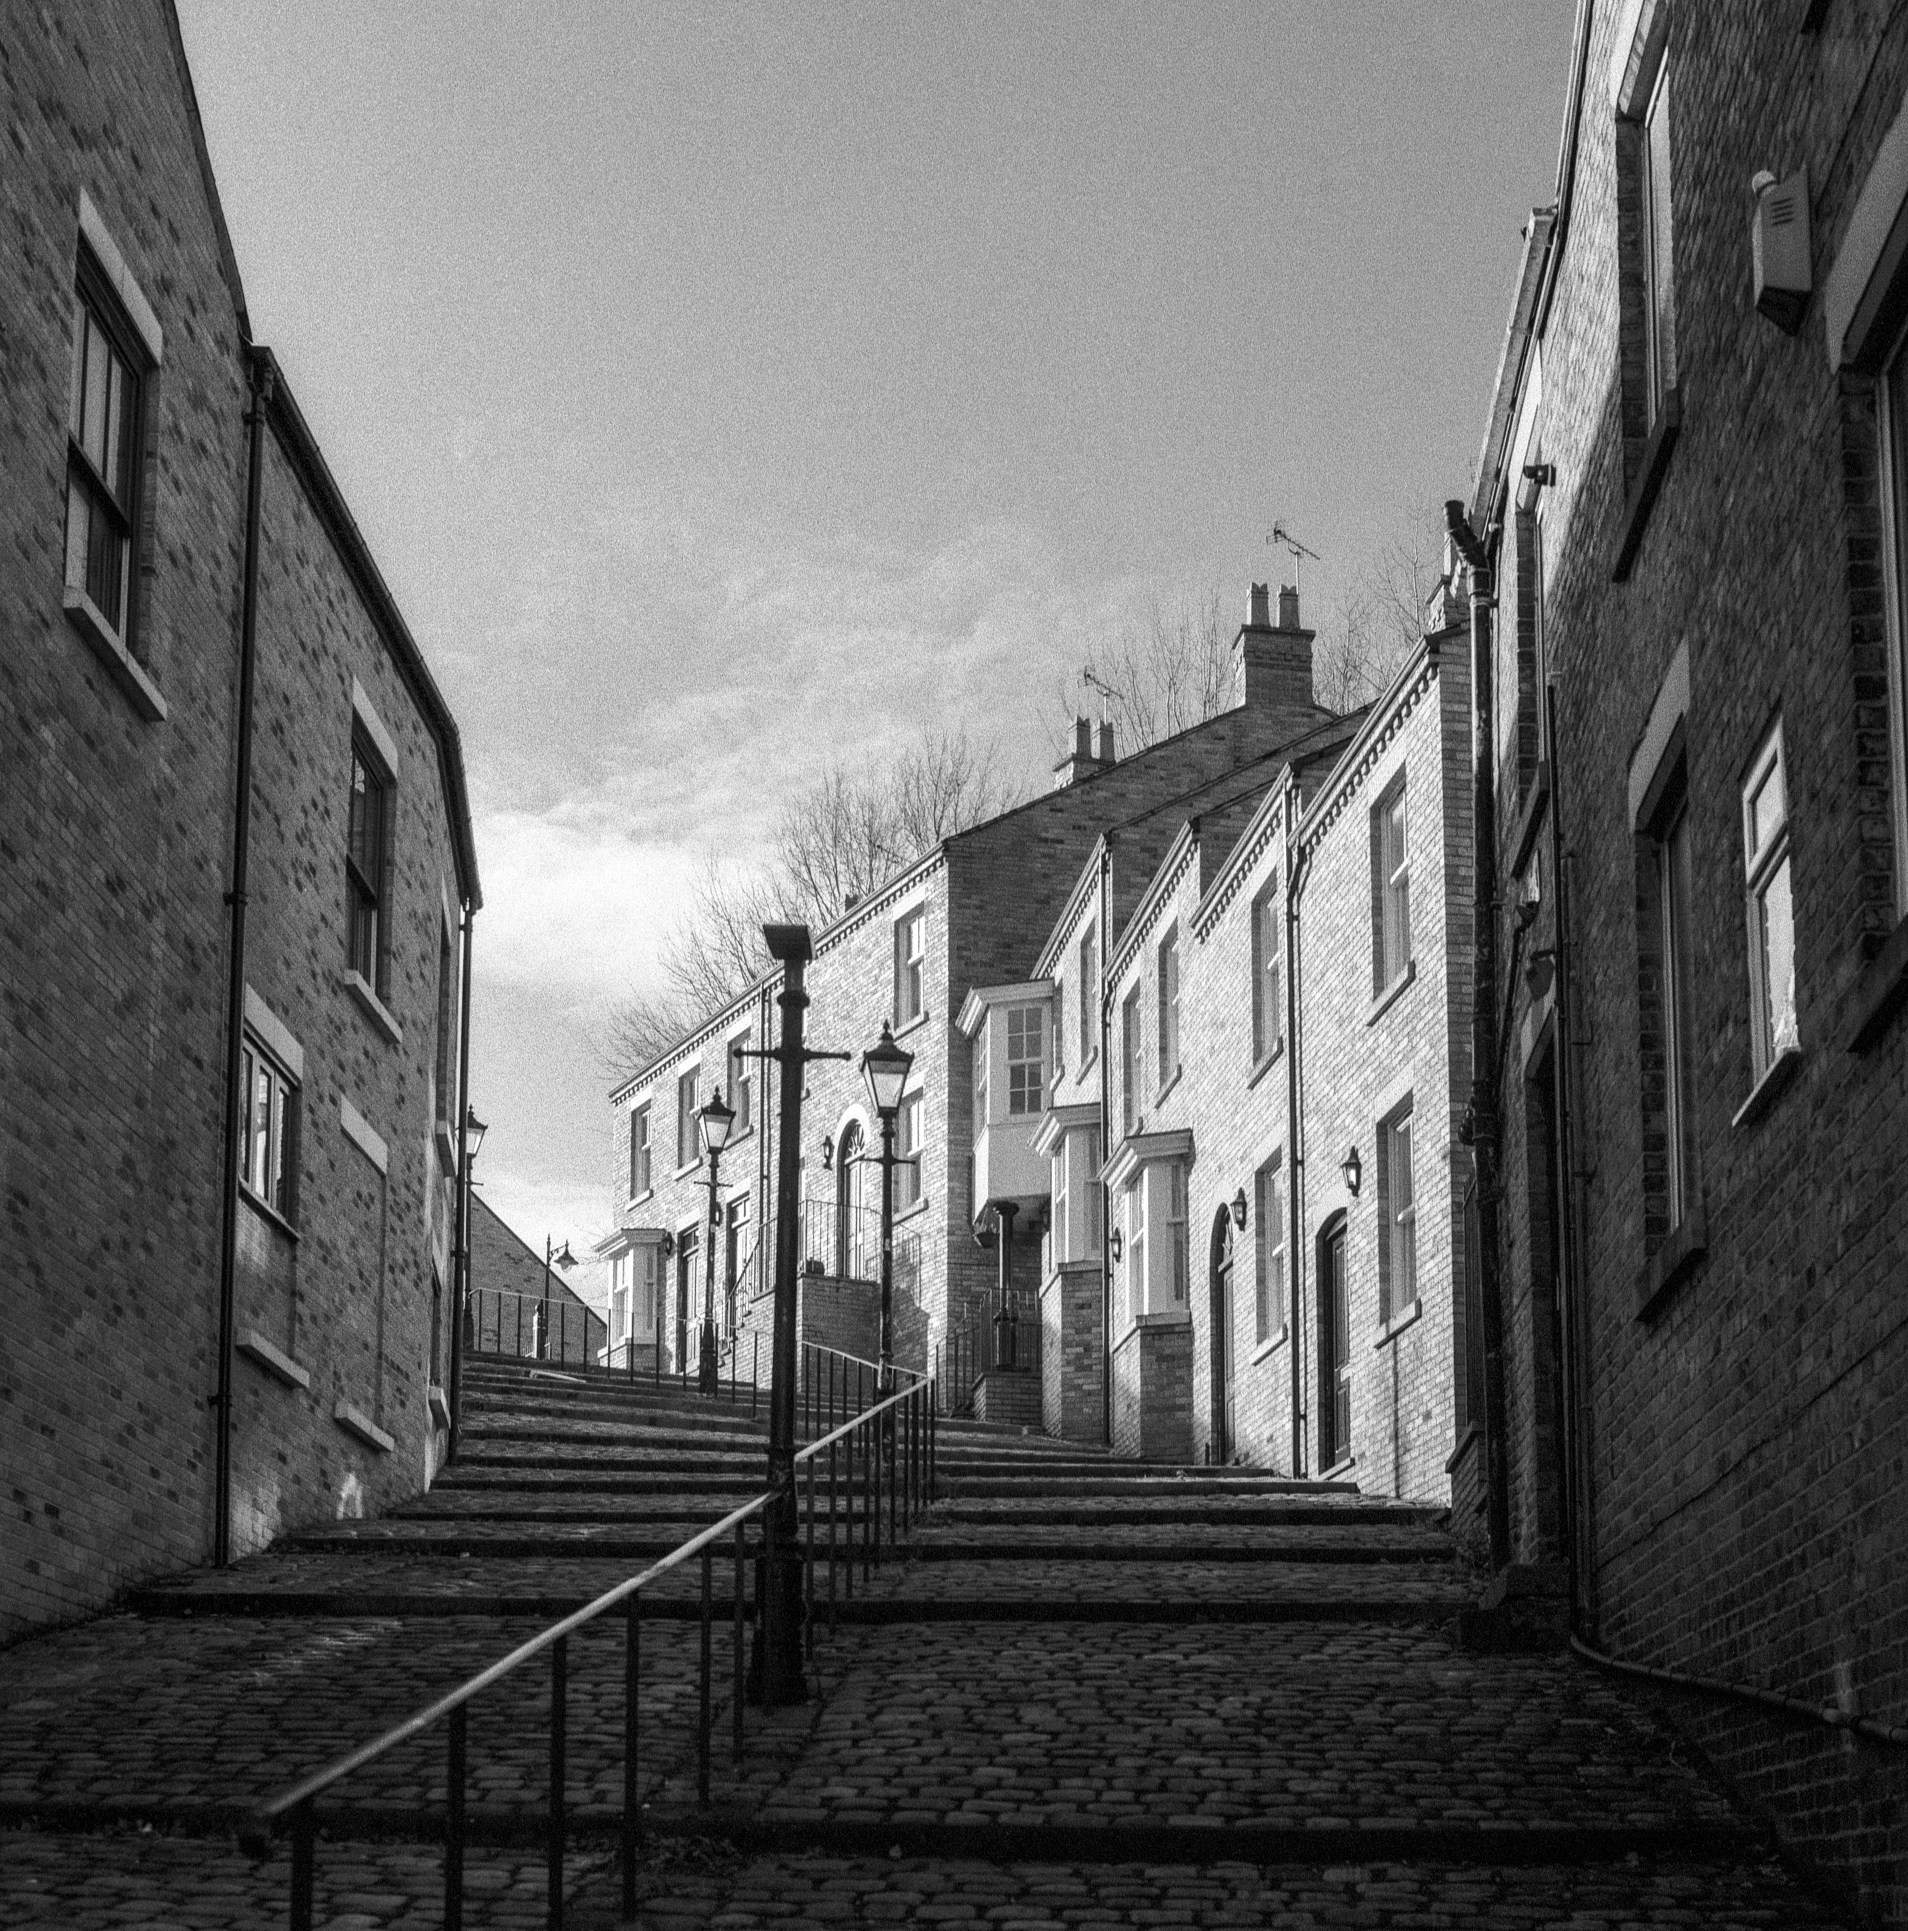 a view of a city street, in black and white